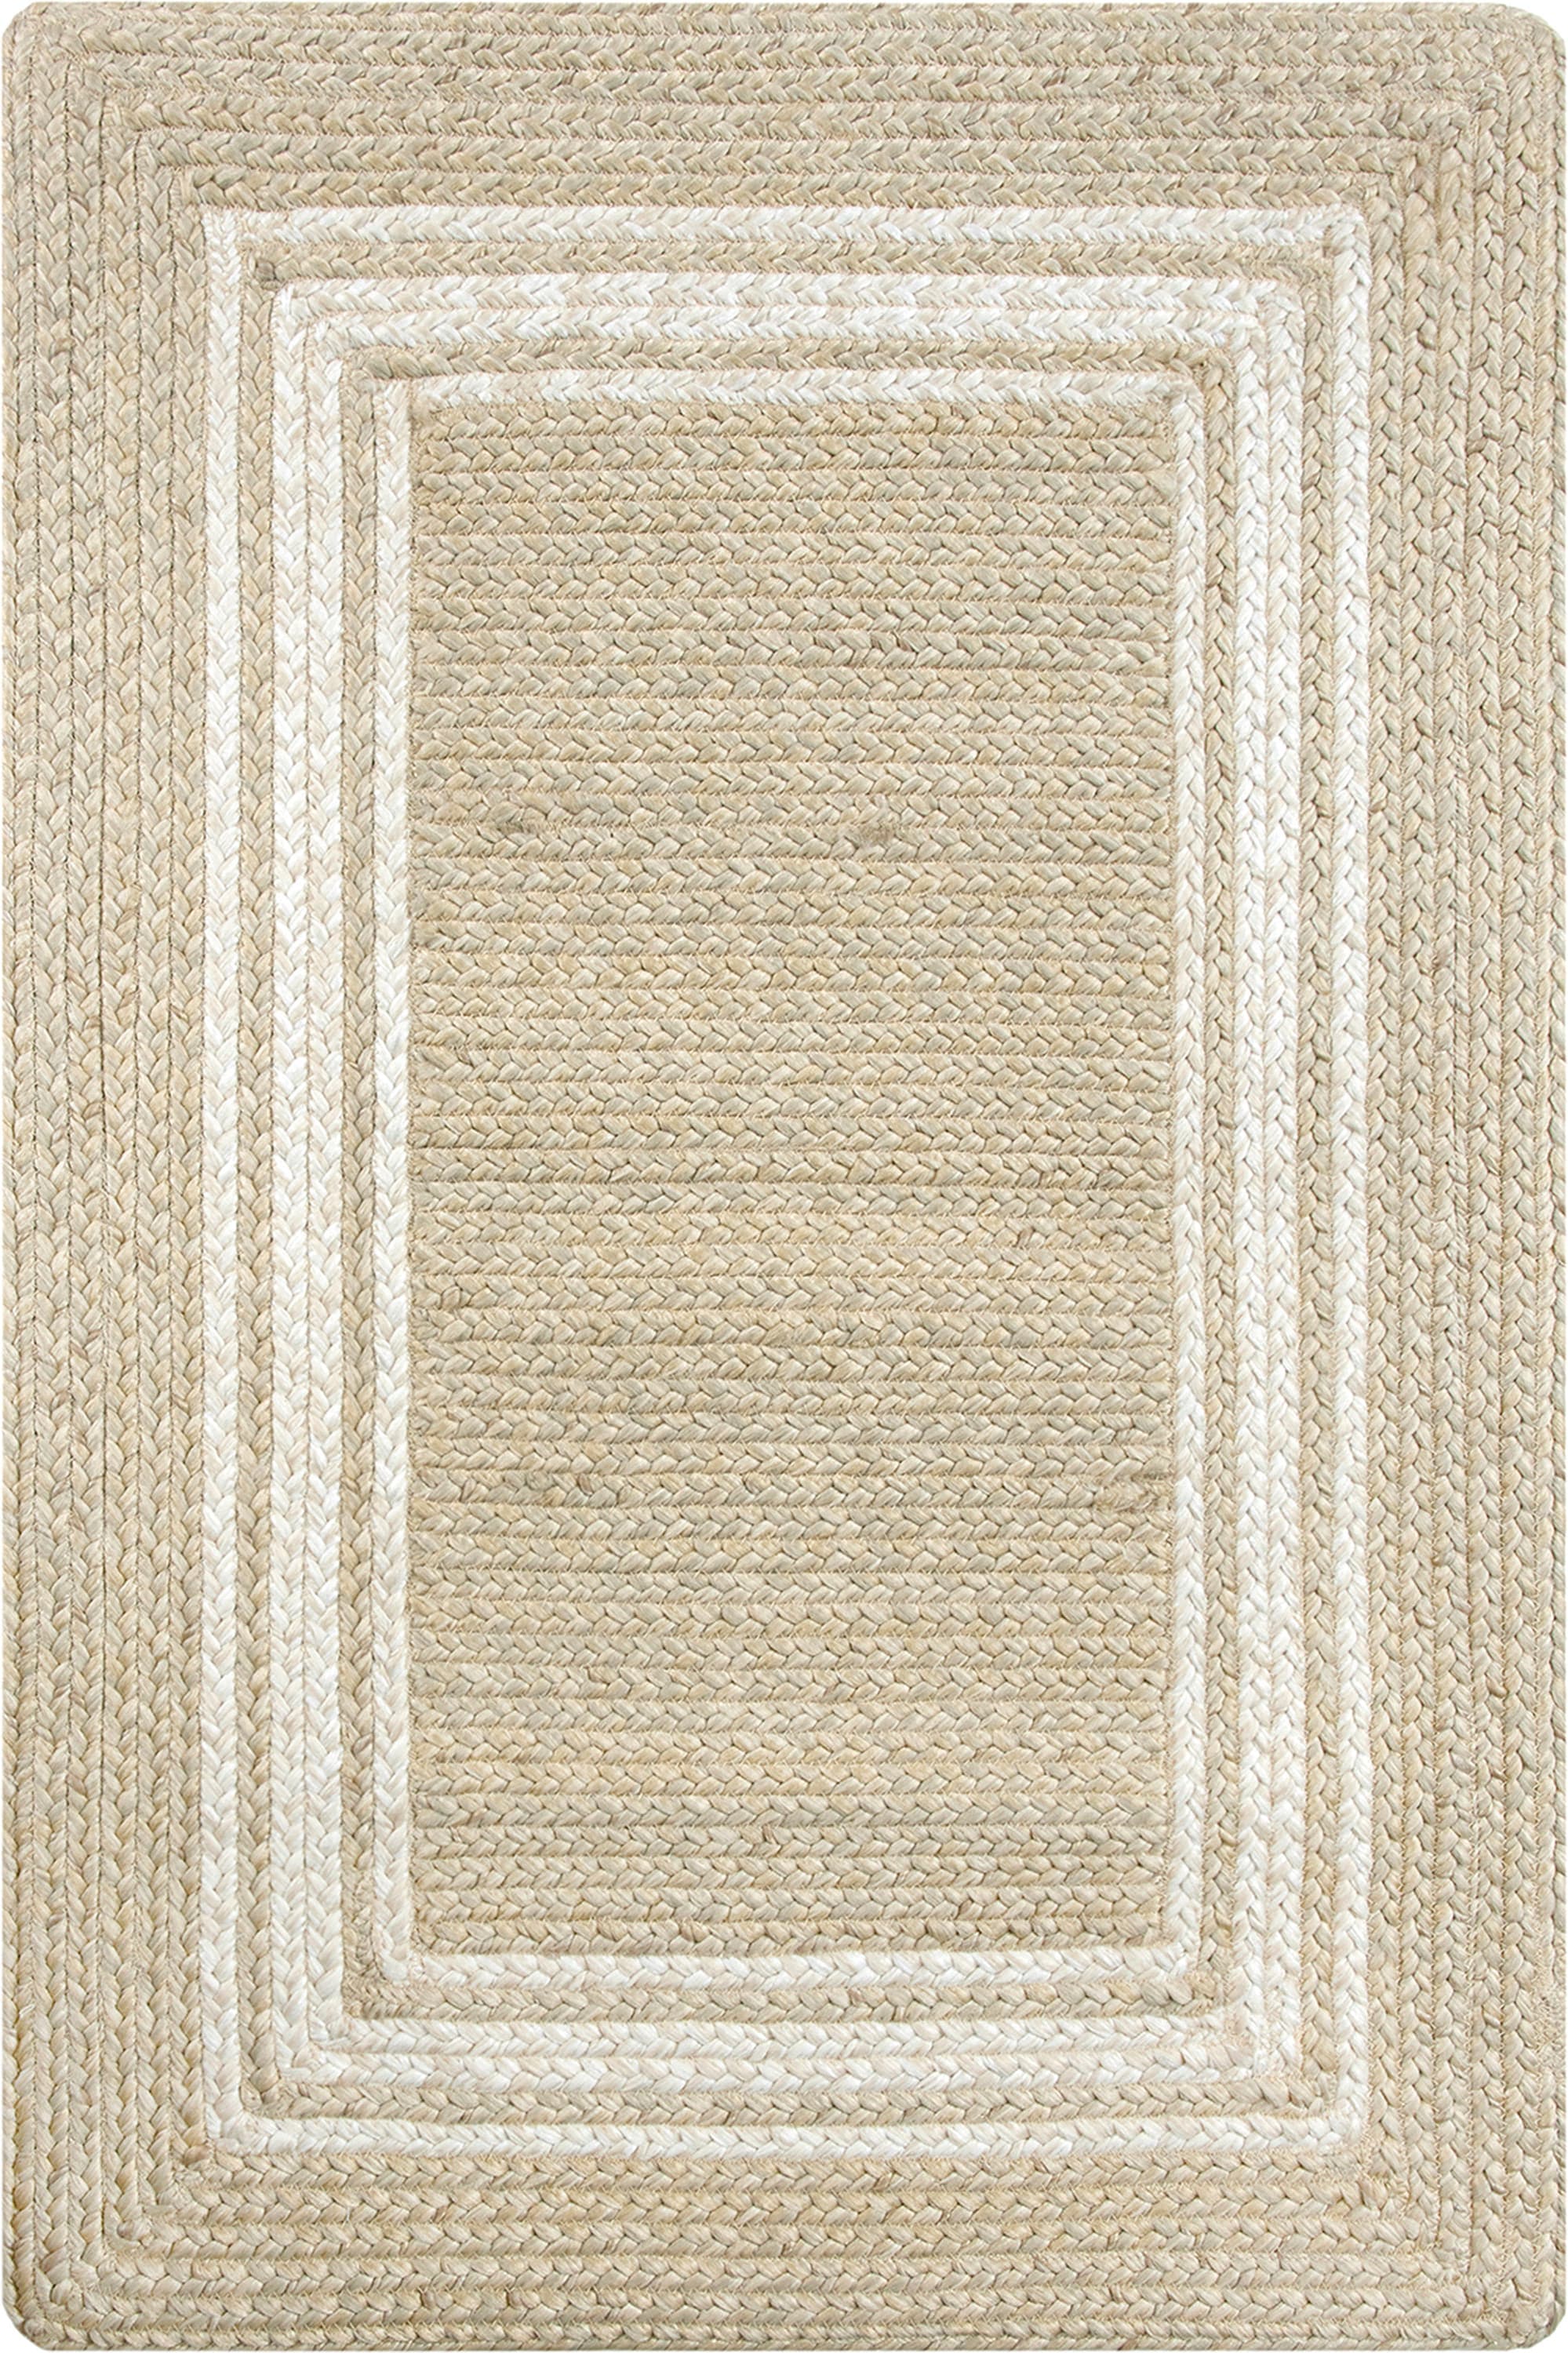 Off White Veronica Wool Braided Area Rug